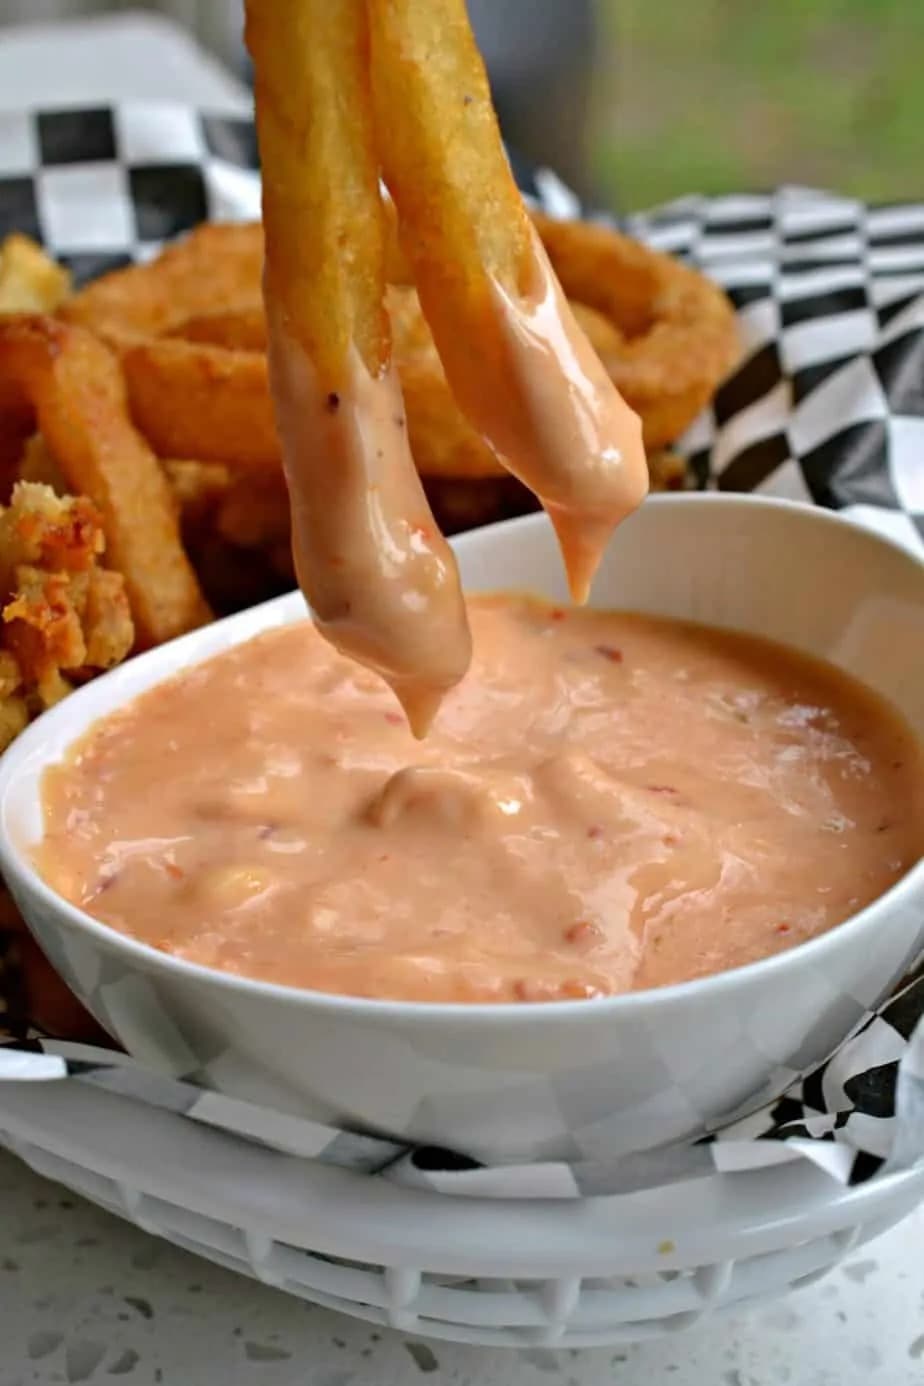 Spicy boom boom sauce served with fries